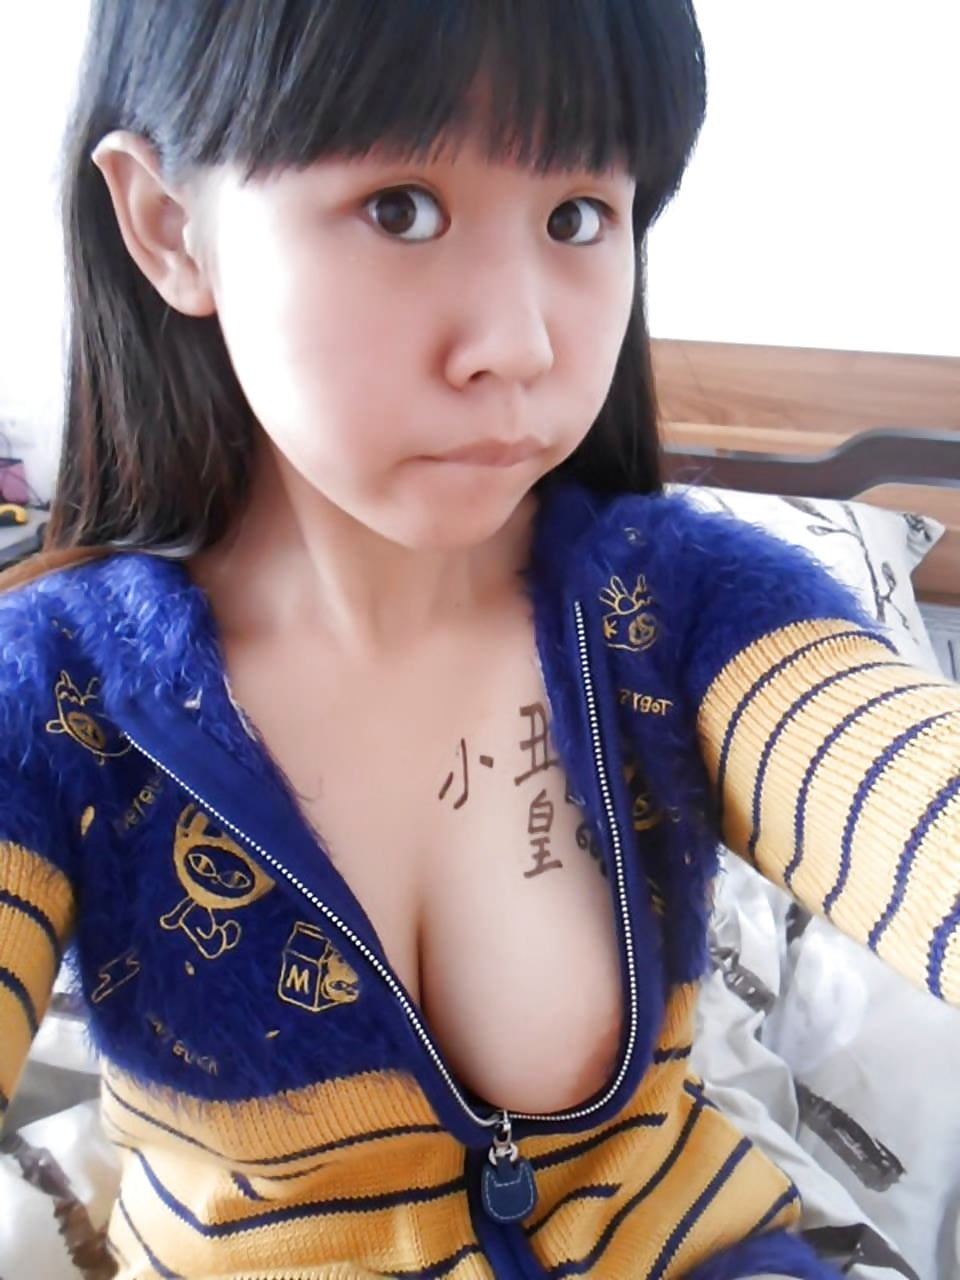 Chinese teen exposed (14/54)